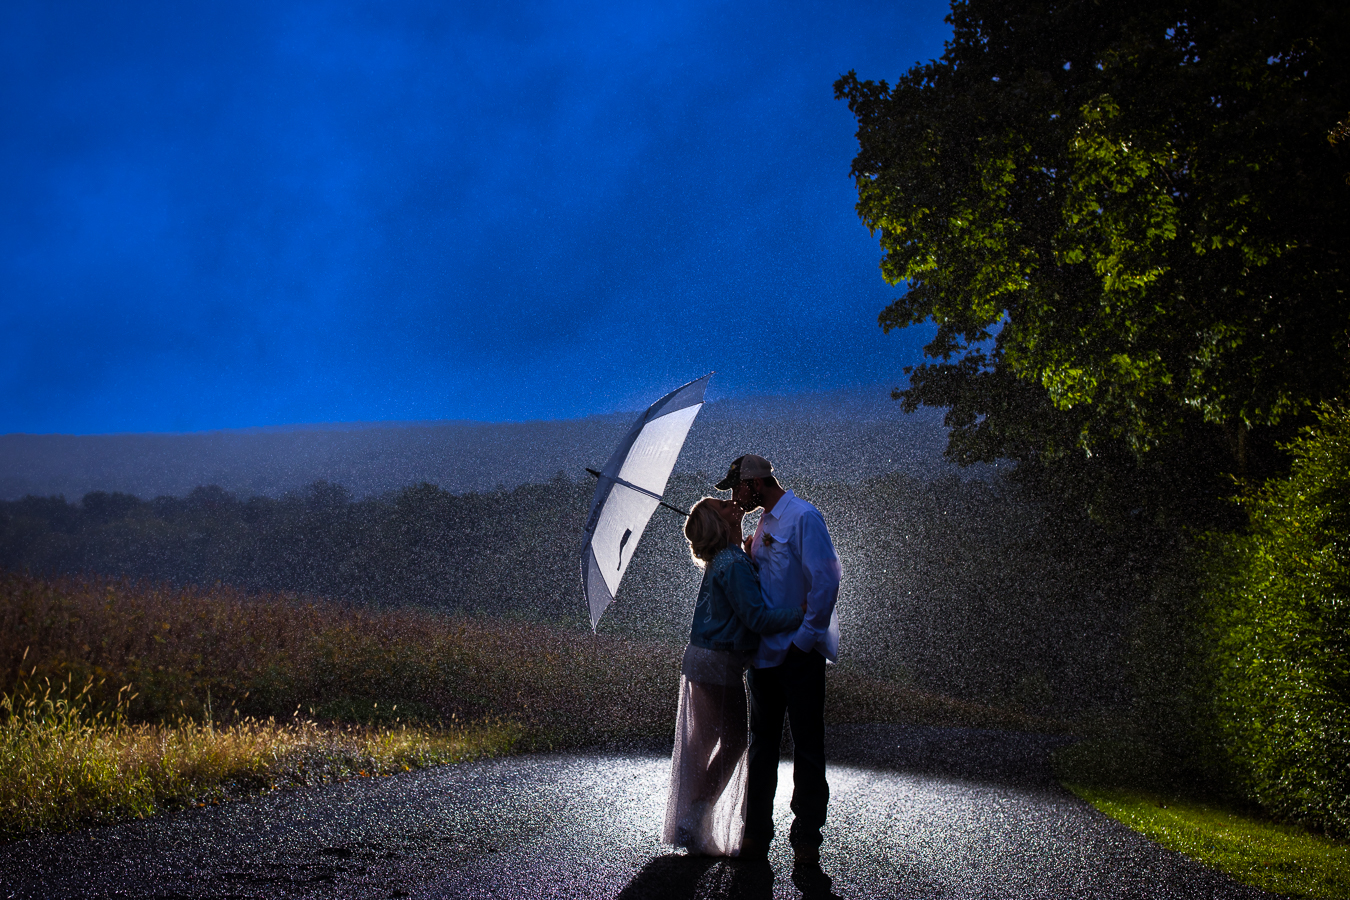 creative pa country wedding photographer, lisa rhinehart, captures this romantic night shot of the bride and groom as they stand on the road sharing a kiss in the middle of a downpour during their country inspired wedding